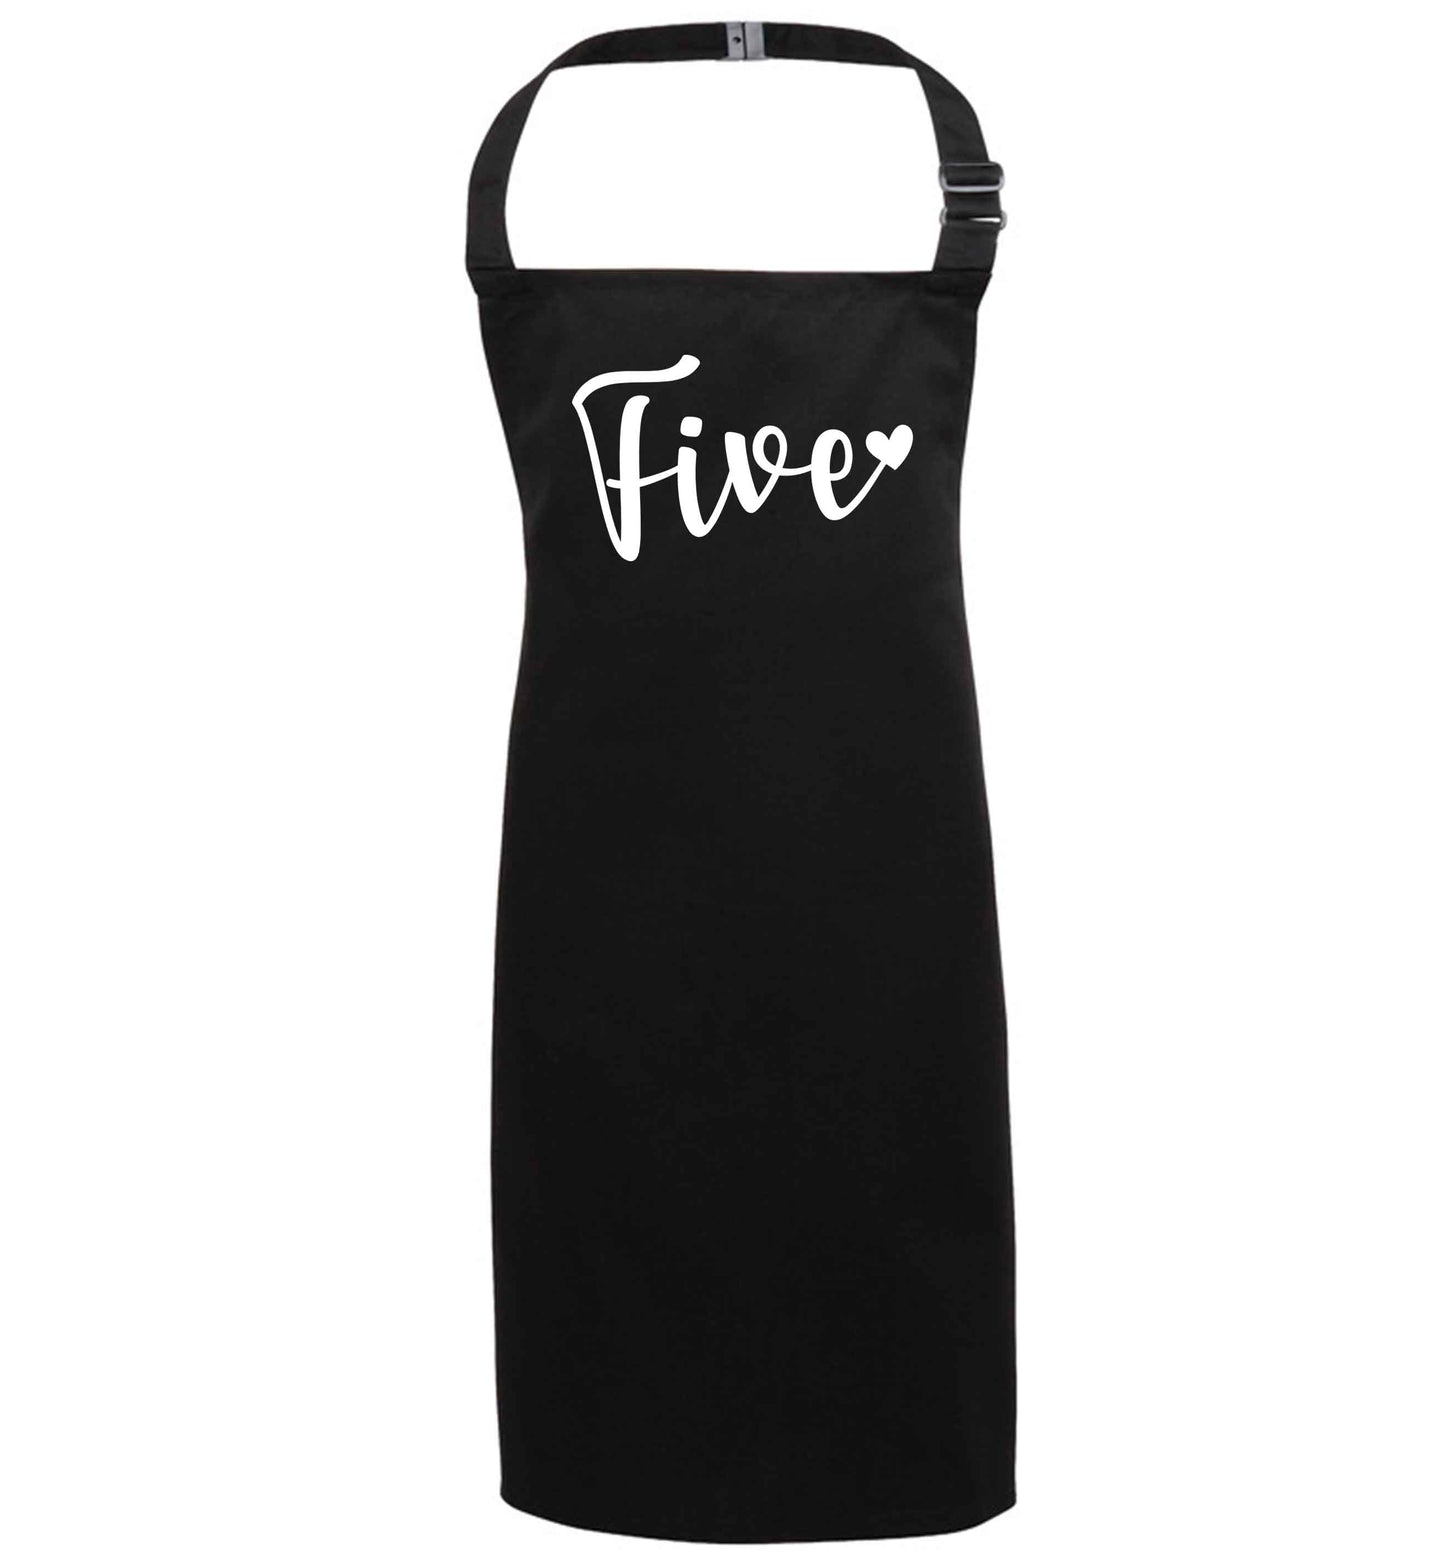 Five and heart black apron 7-10 years